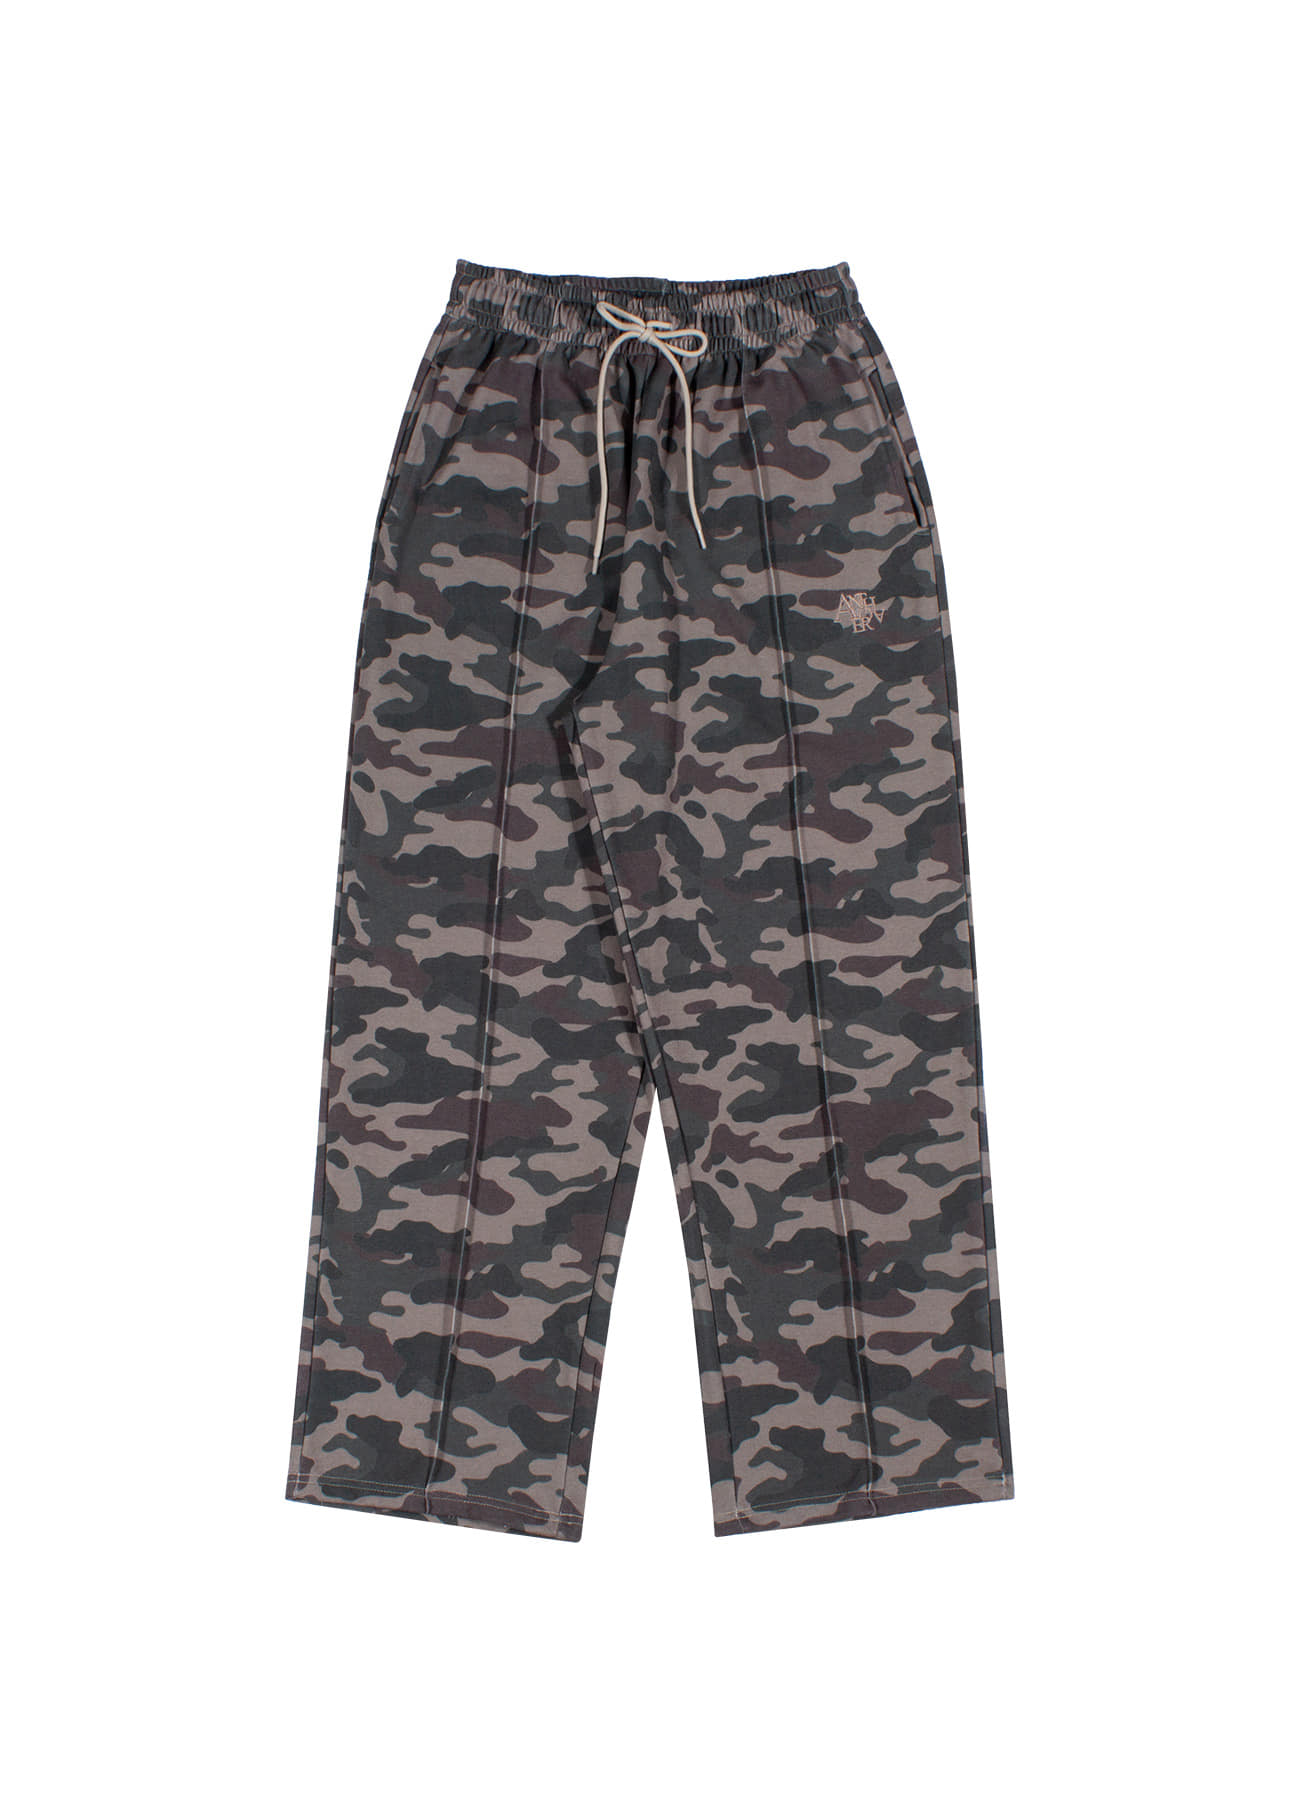 MILITARY WIDE SWEAT PANTS (2 color)